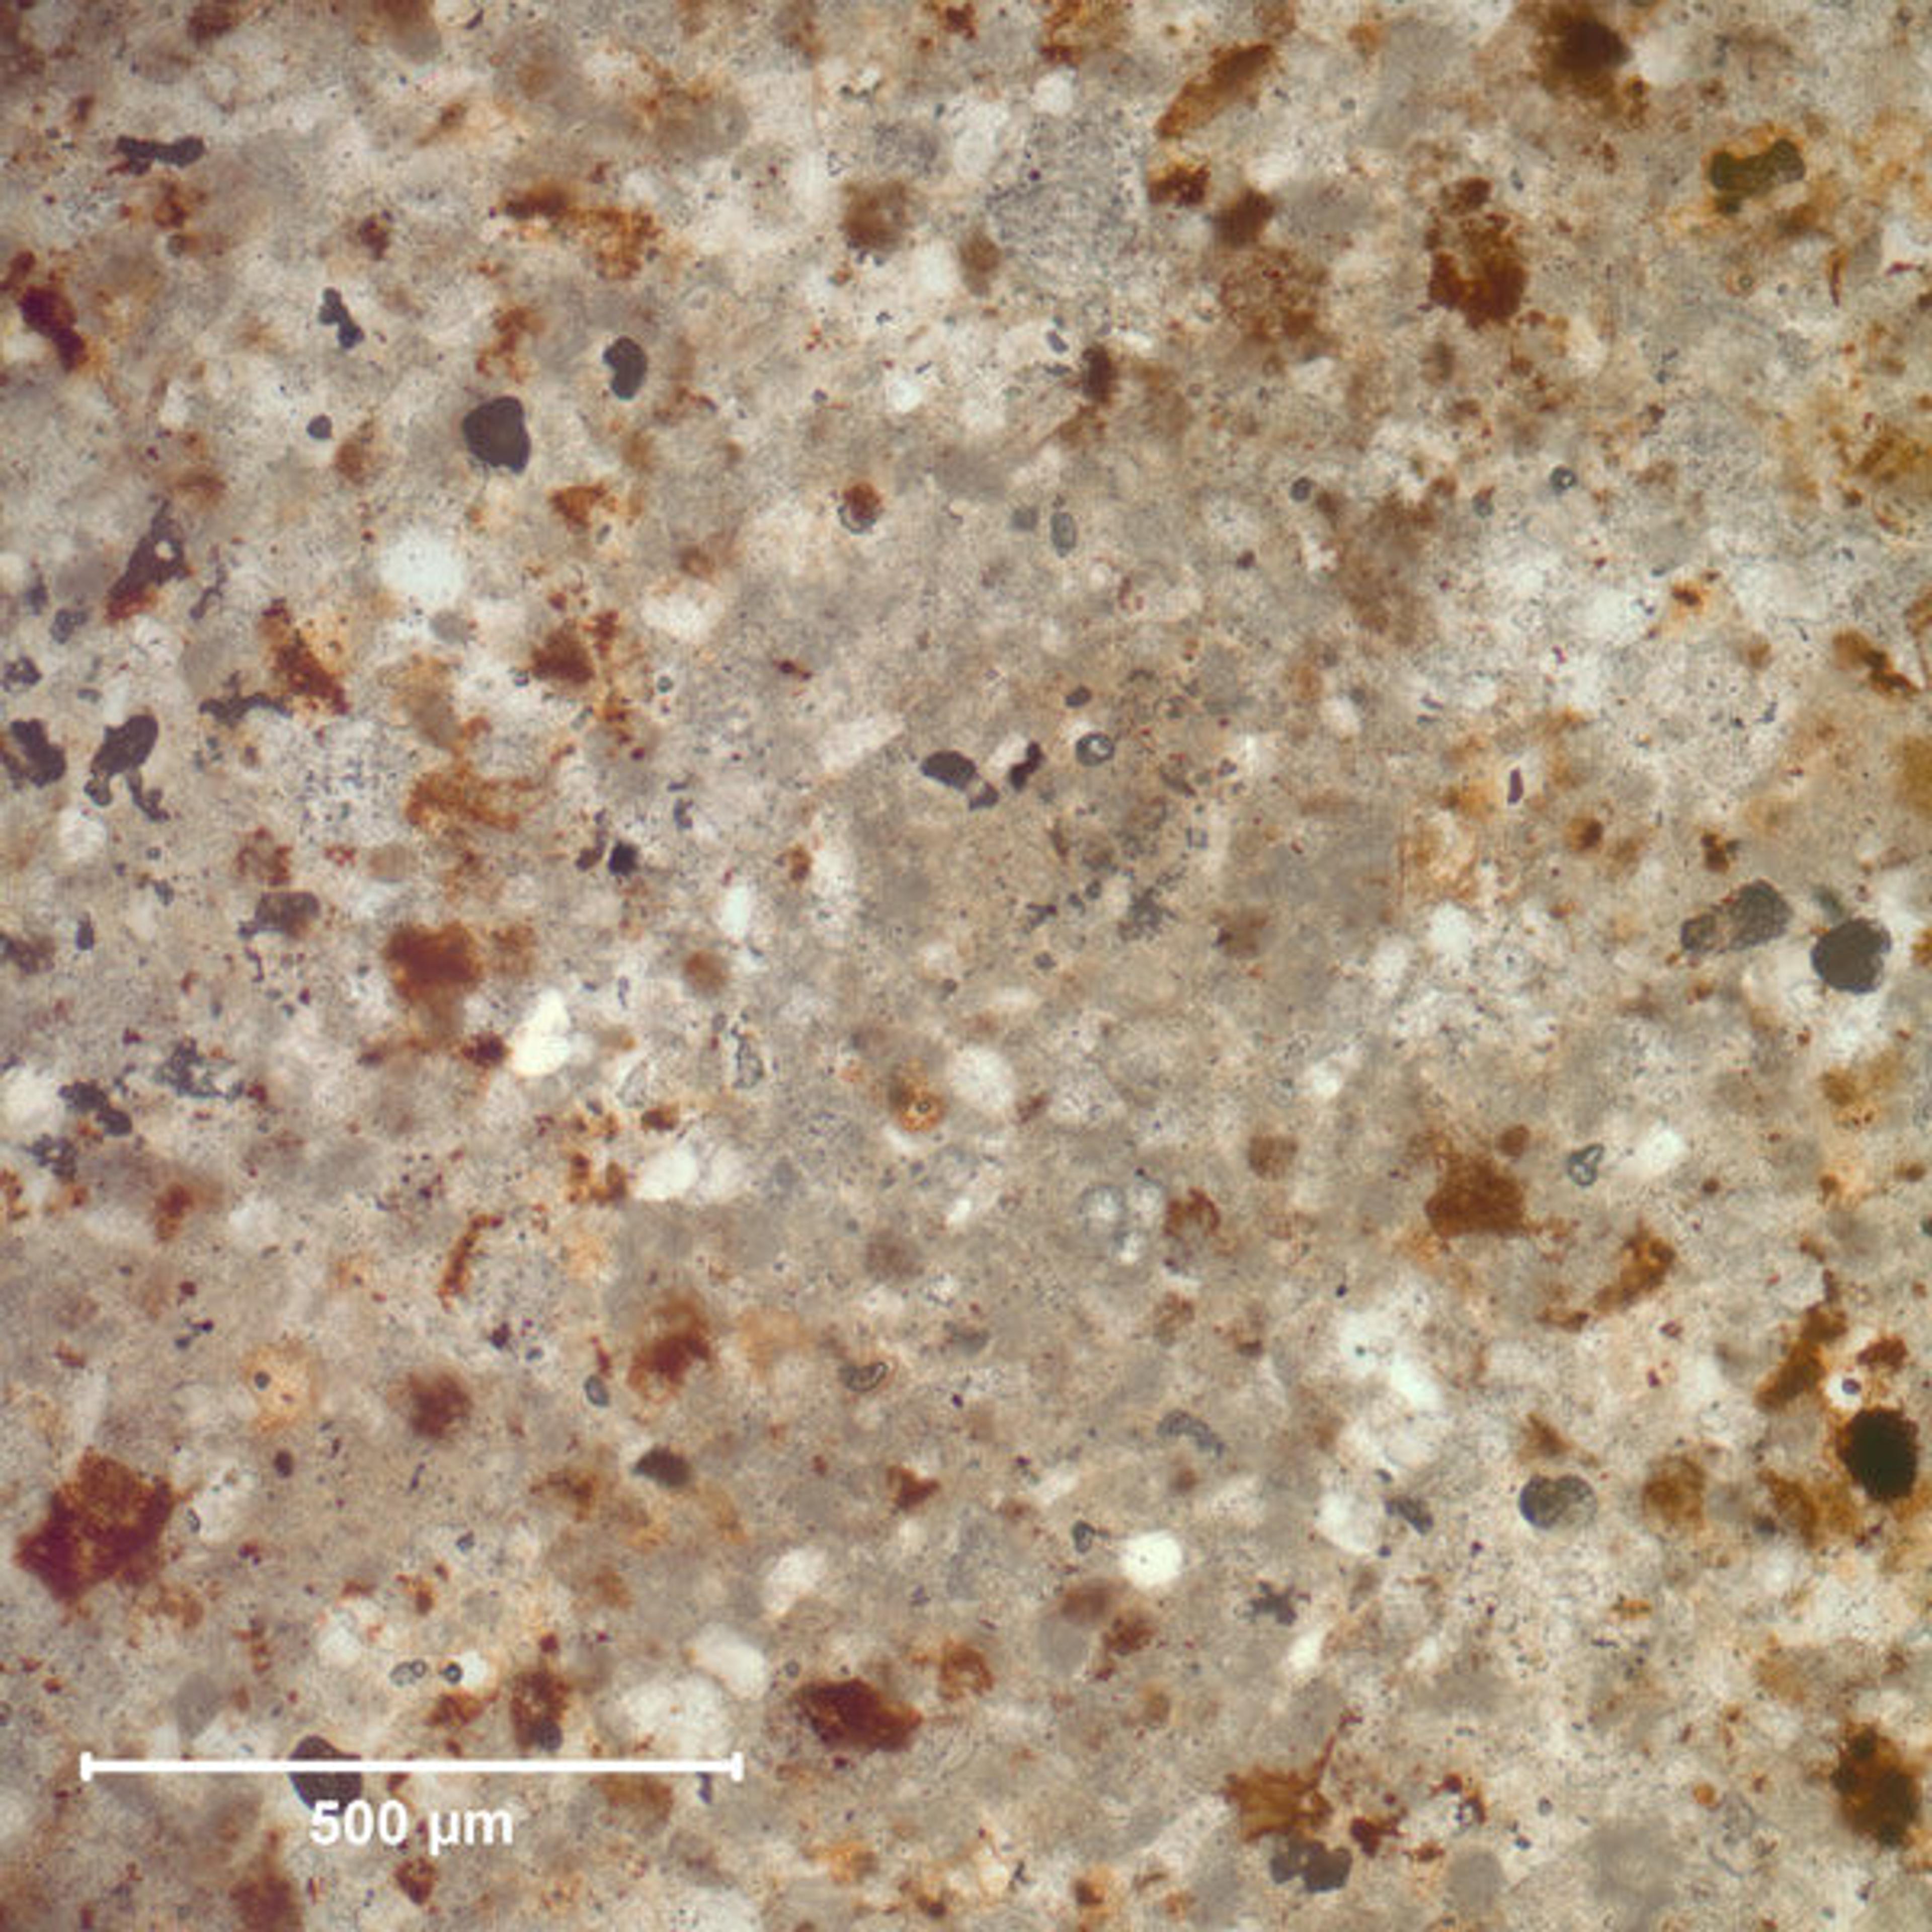 Thin-section slide of stone, identifying stone from Apremont